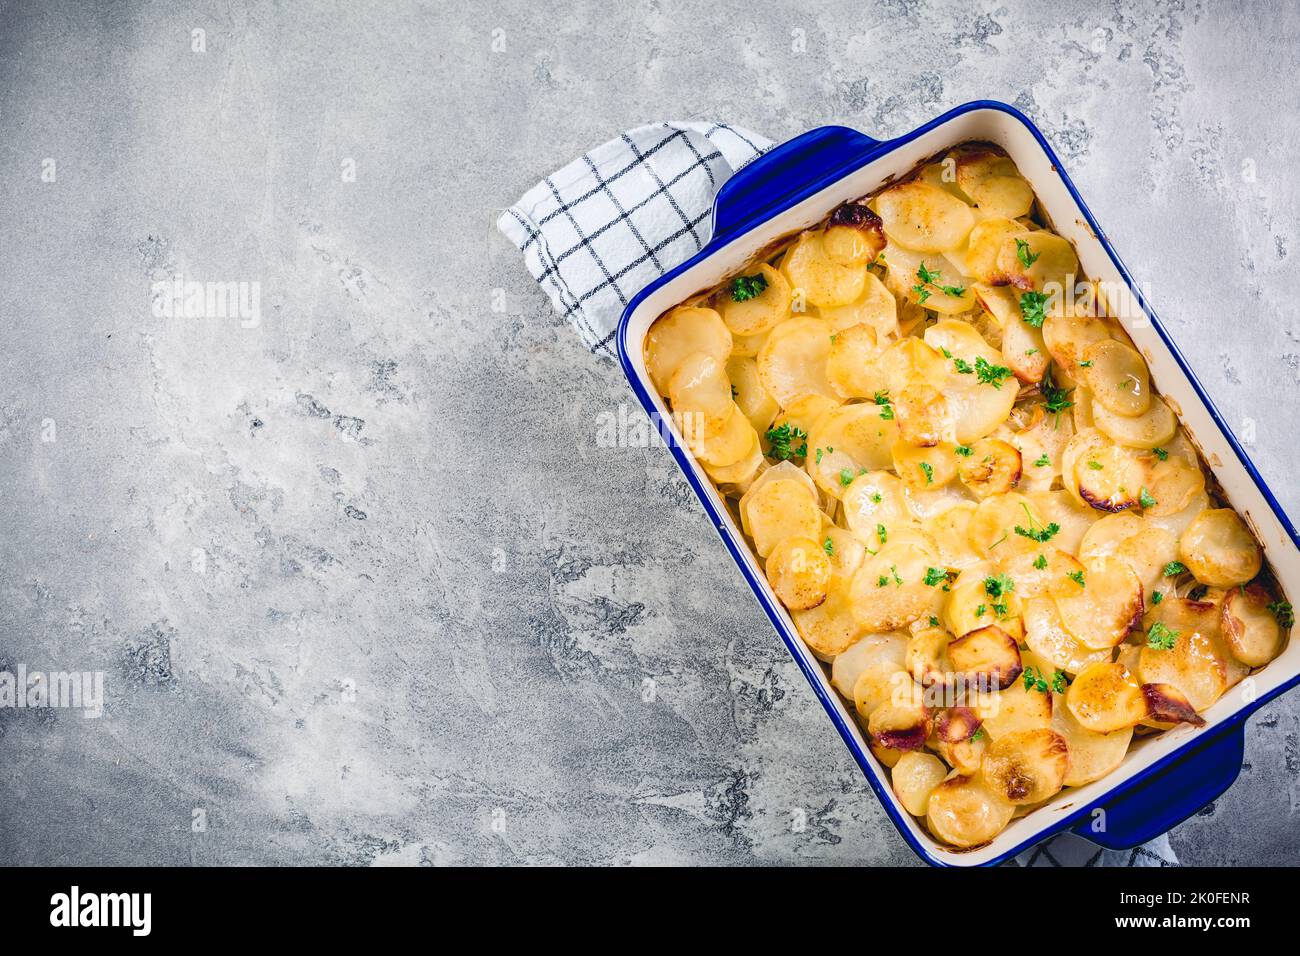 Potato casserole with onions and eggs. Vegetarian meal. Stock Photo